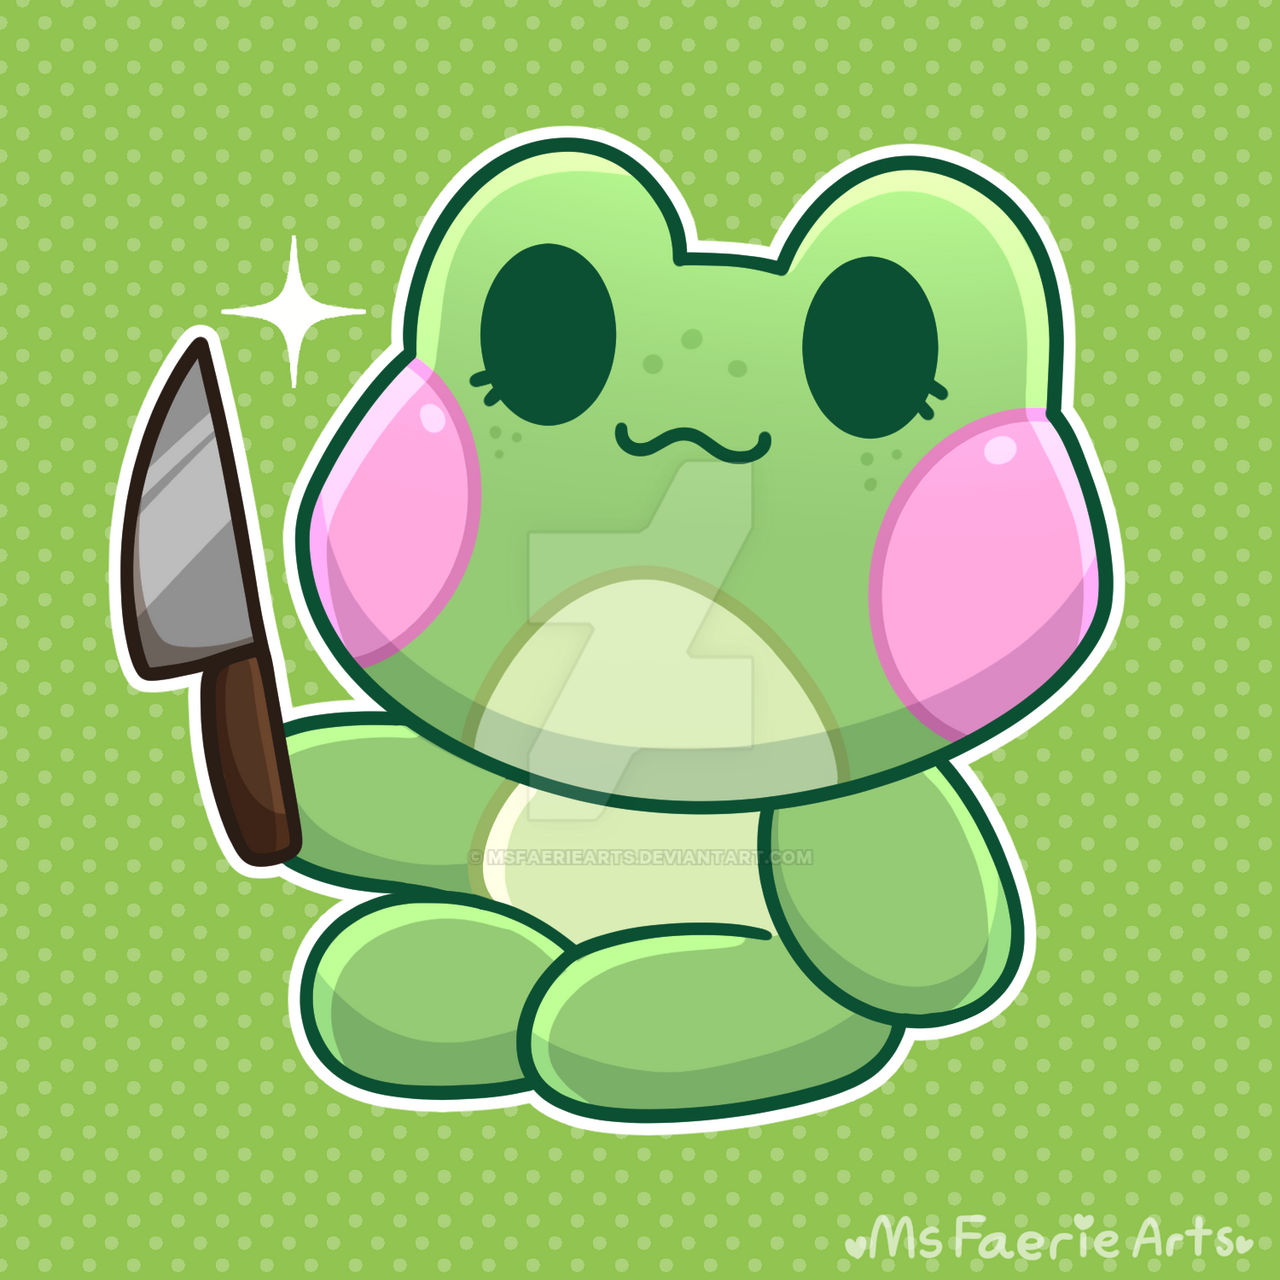 Cute frog with a knife